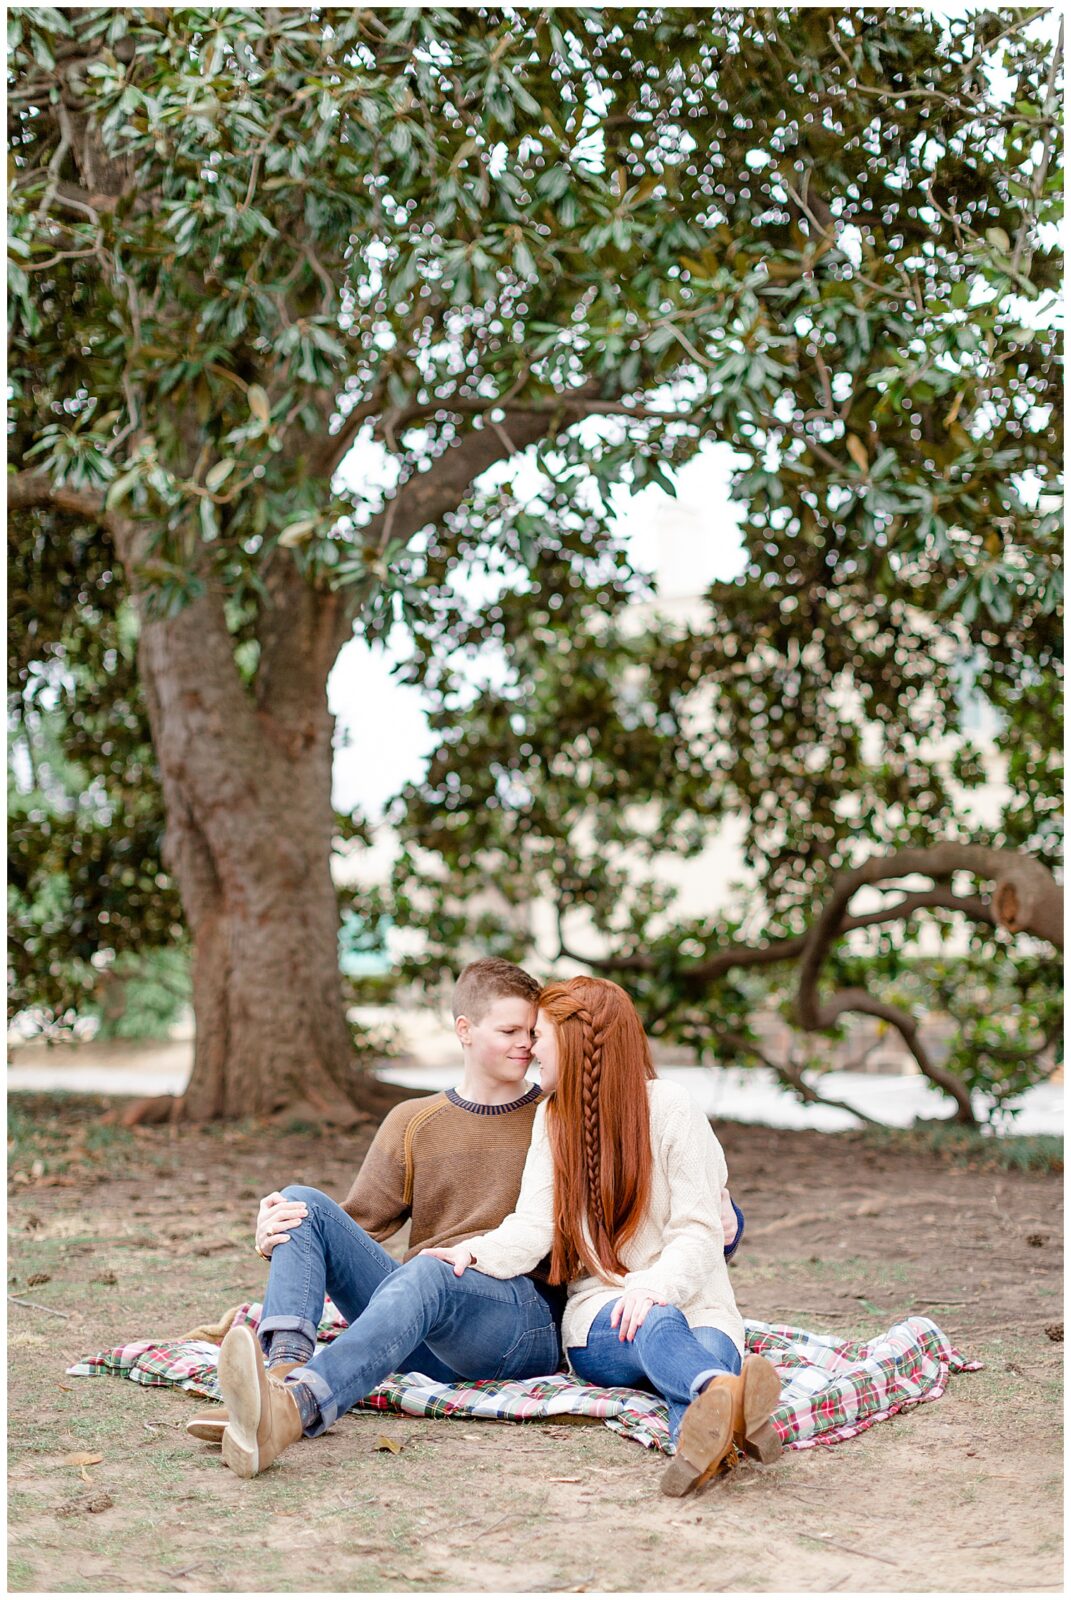 grant and ashley in front of the magnolia tree at woodward park during engagement photos. 